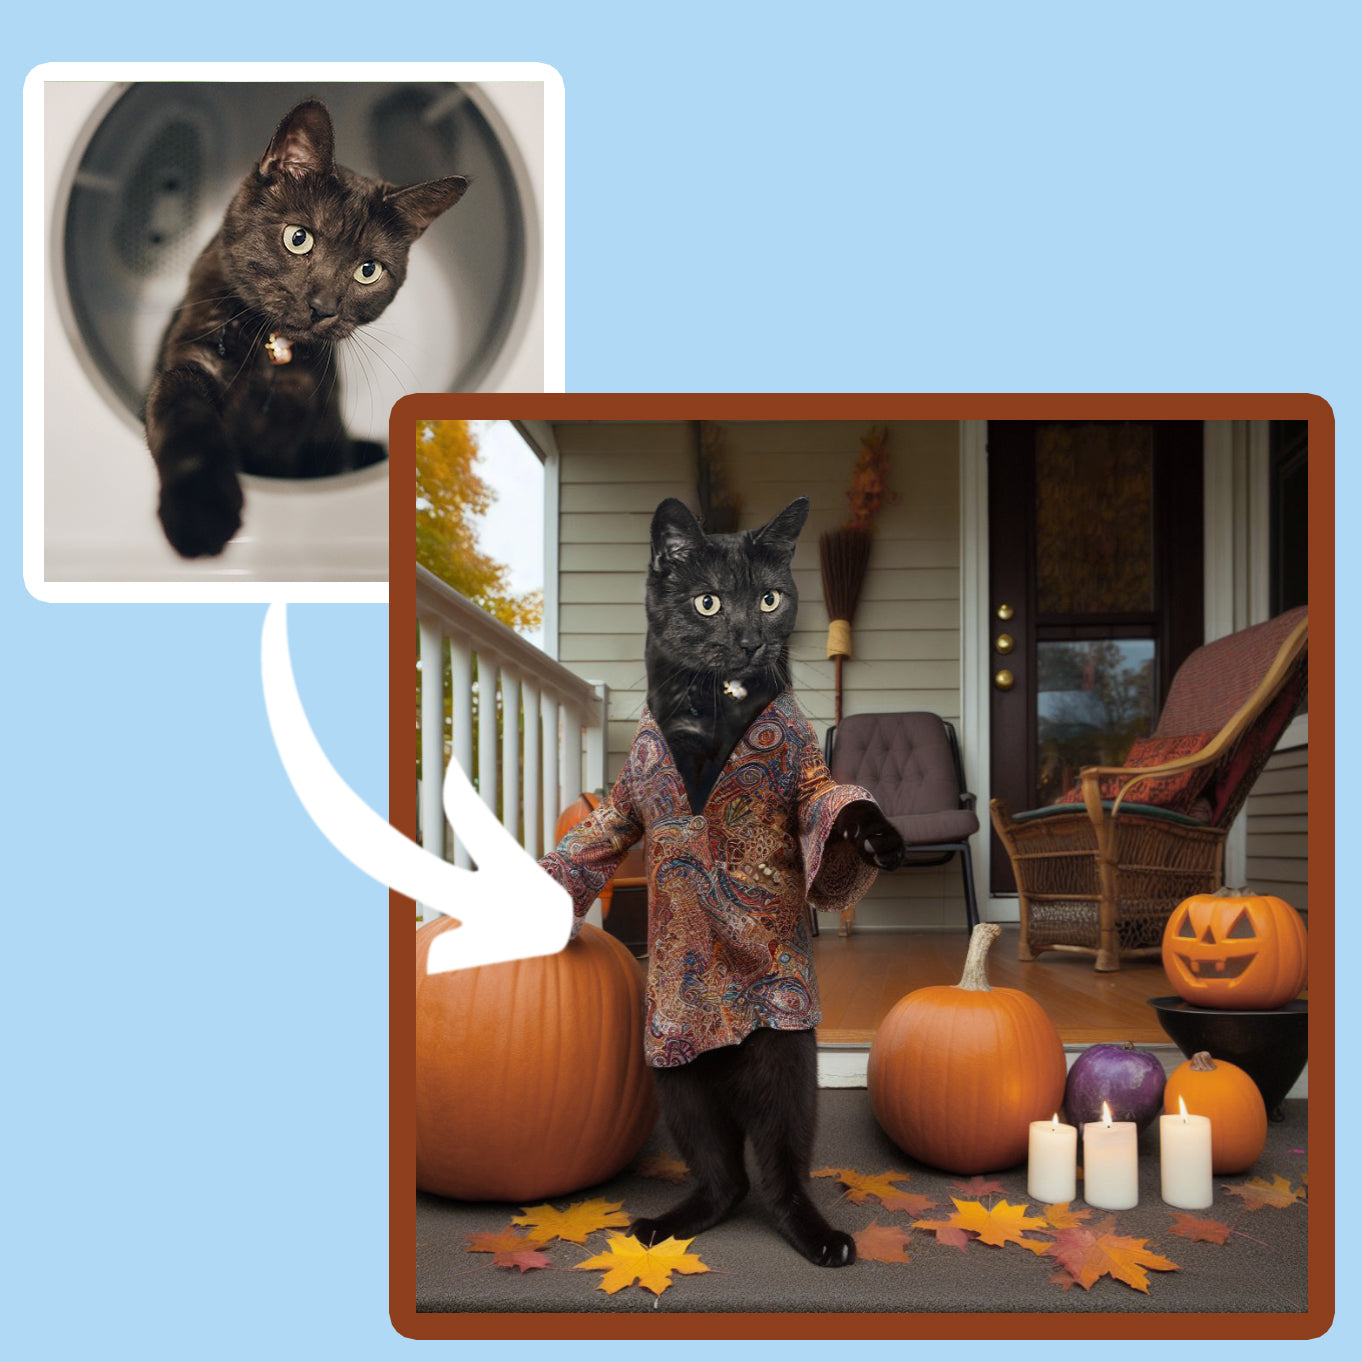 A reto pet portrait 1960s a black cat standing like a human in front of a halloween house and full moon